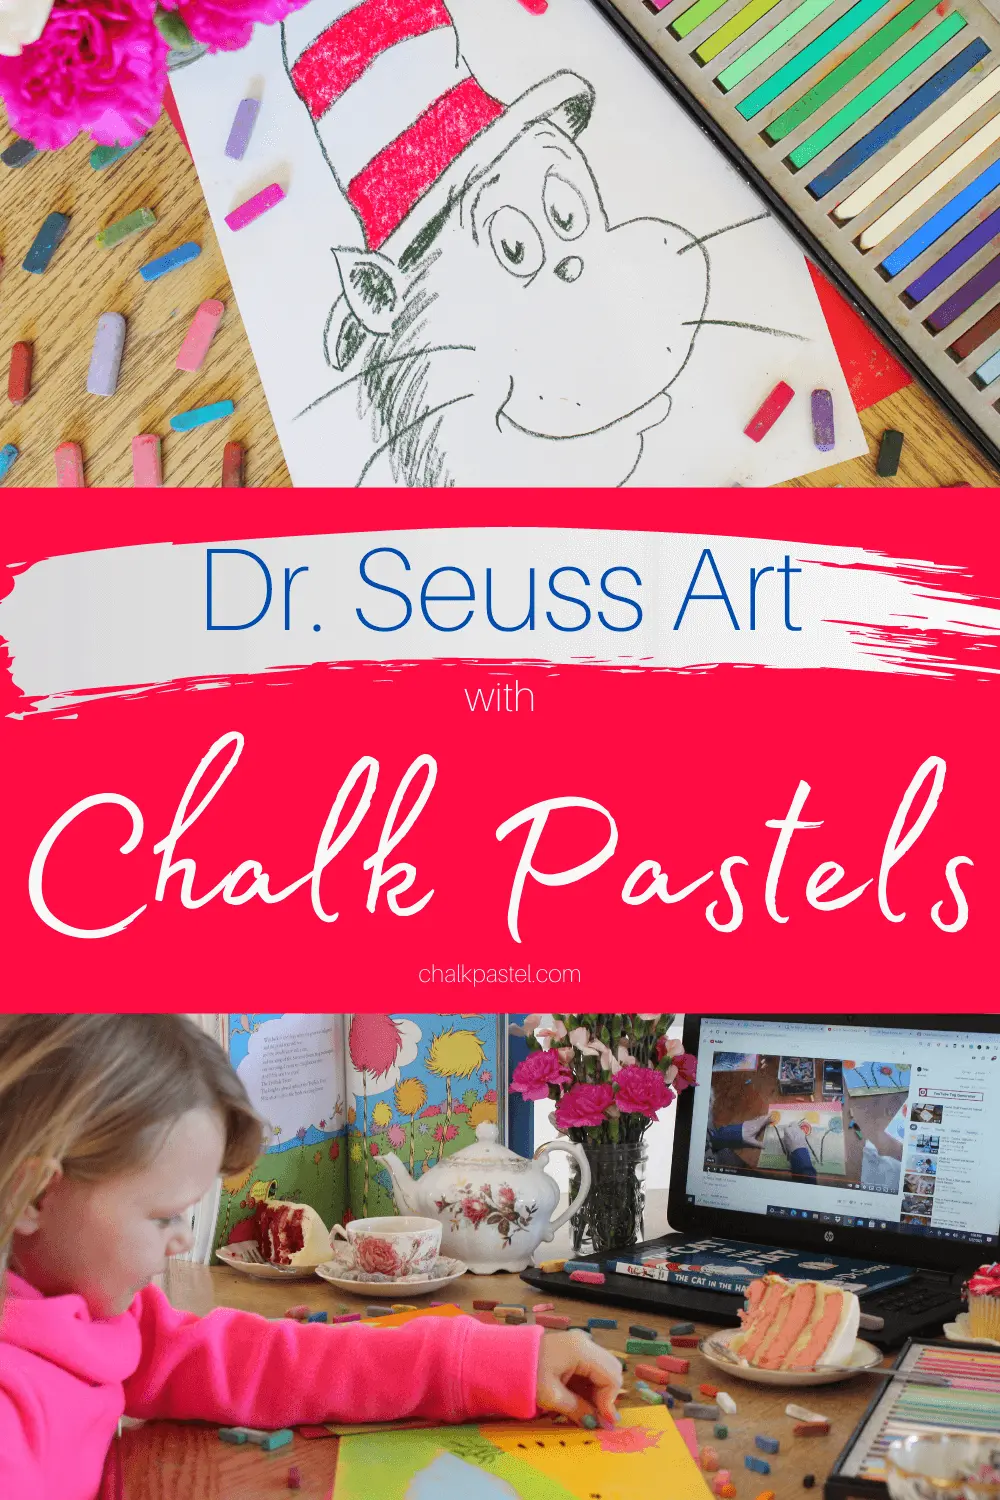 Dr. Seuss Art with Chalk Pastels: Dr. Seuss art with chalk pastels? Yes, please! How adorable would a Cat in the Hat be hanging on your refrigerator? How about the lovely Truffala Trees? Nana has a lesson for both! Now you and your kiddo can enjoy a Seussical art time with chalk pastels! #chalkpastels #DrSeussArt #DrSeussArtforkids #thecatinthehatart #truffalatreesart #homeschoolart #teatimeart #teatimeartlessons #DrSeussartlessons #chalkpastelarttime